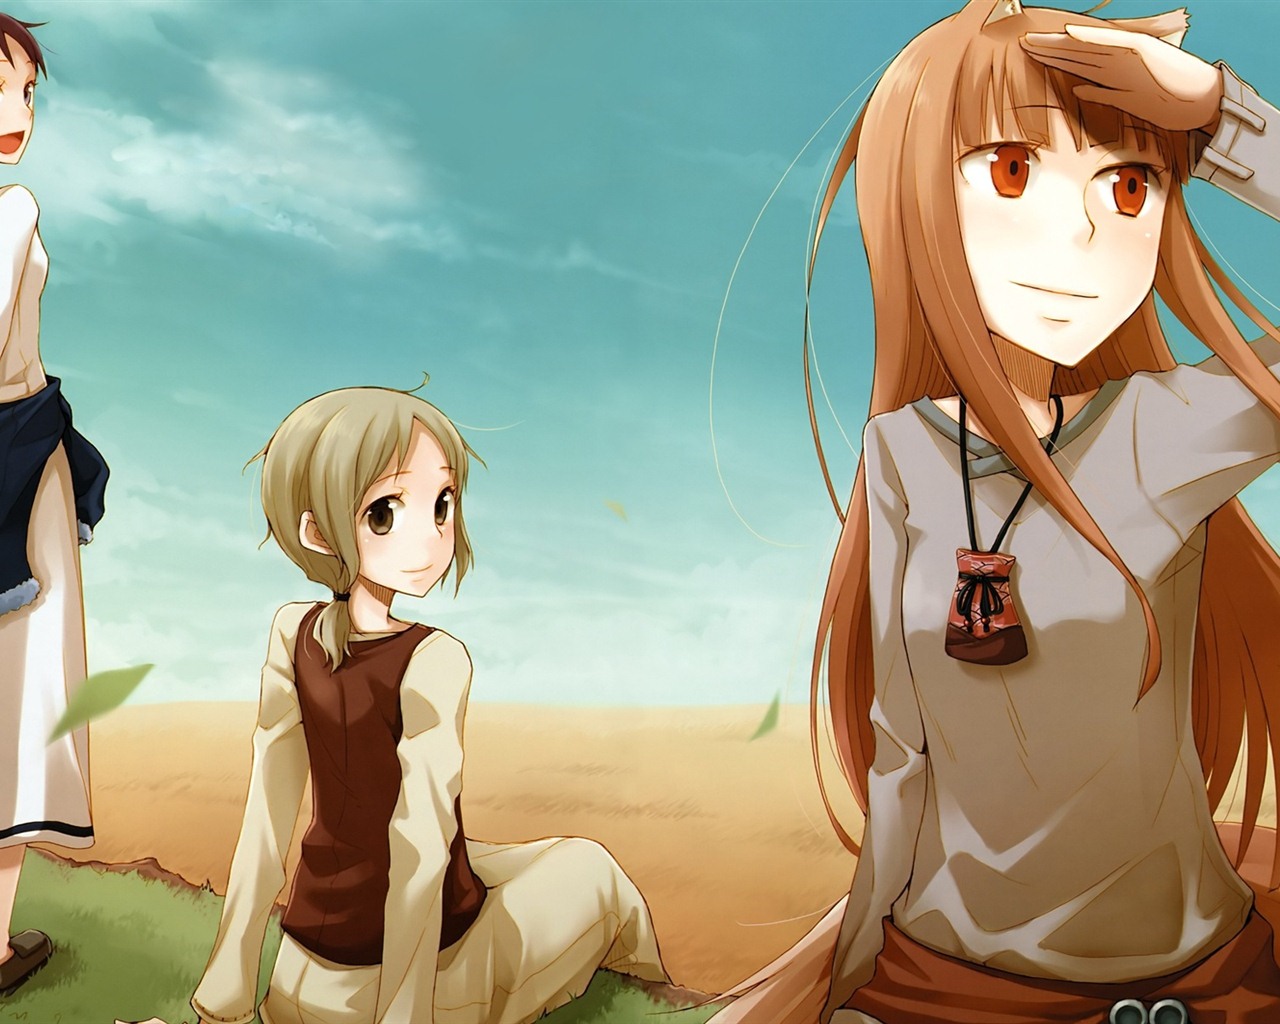 Spice and Wolf HD wallpapers #5 - 1280x1024